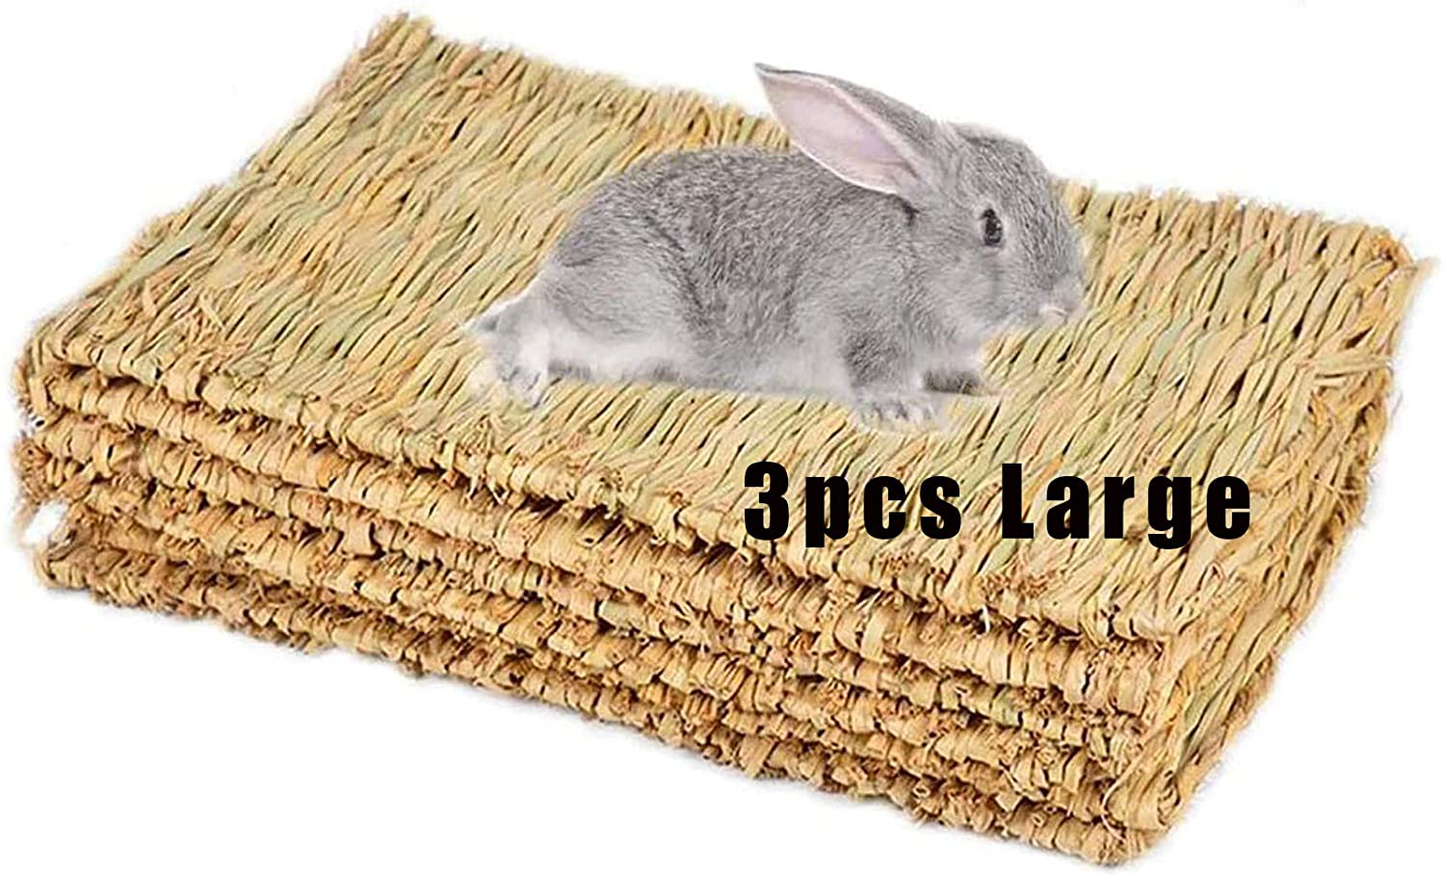 Hamiledyi Grass Mat Woven Bed Mat for Small Animal Large Bunny Bedding Nest Chew Toy Bed Play Toy for Guinea Pig Parrot Rabbit Bunny Hamster Rat